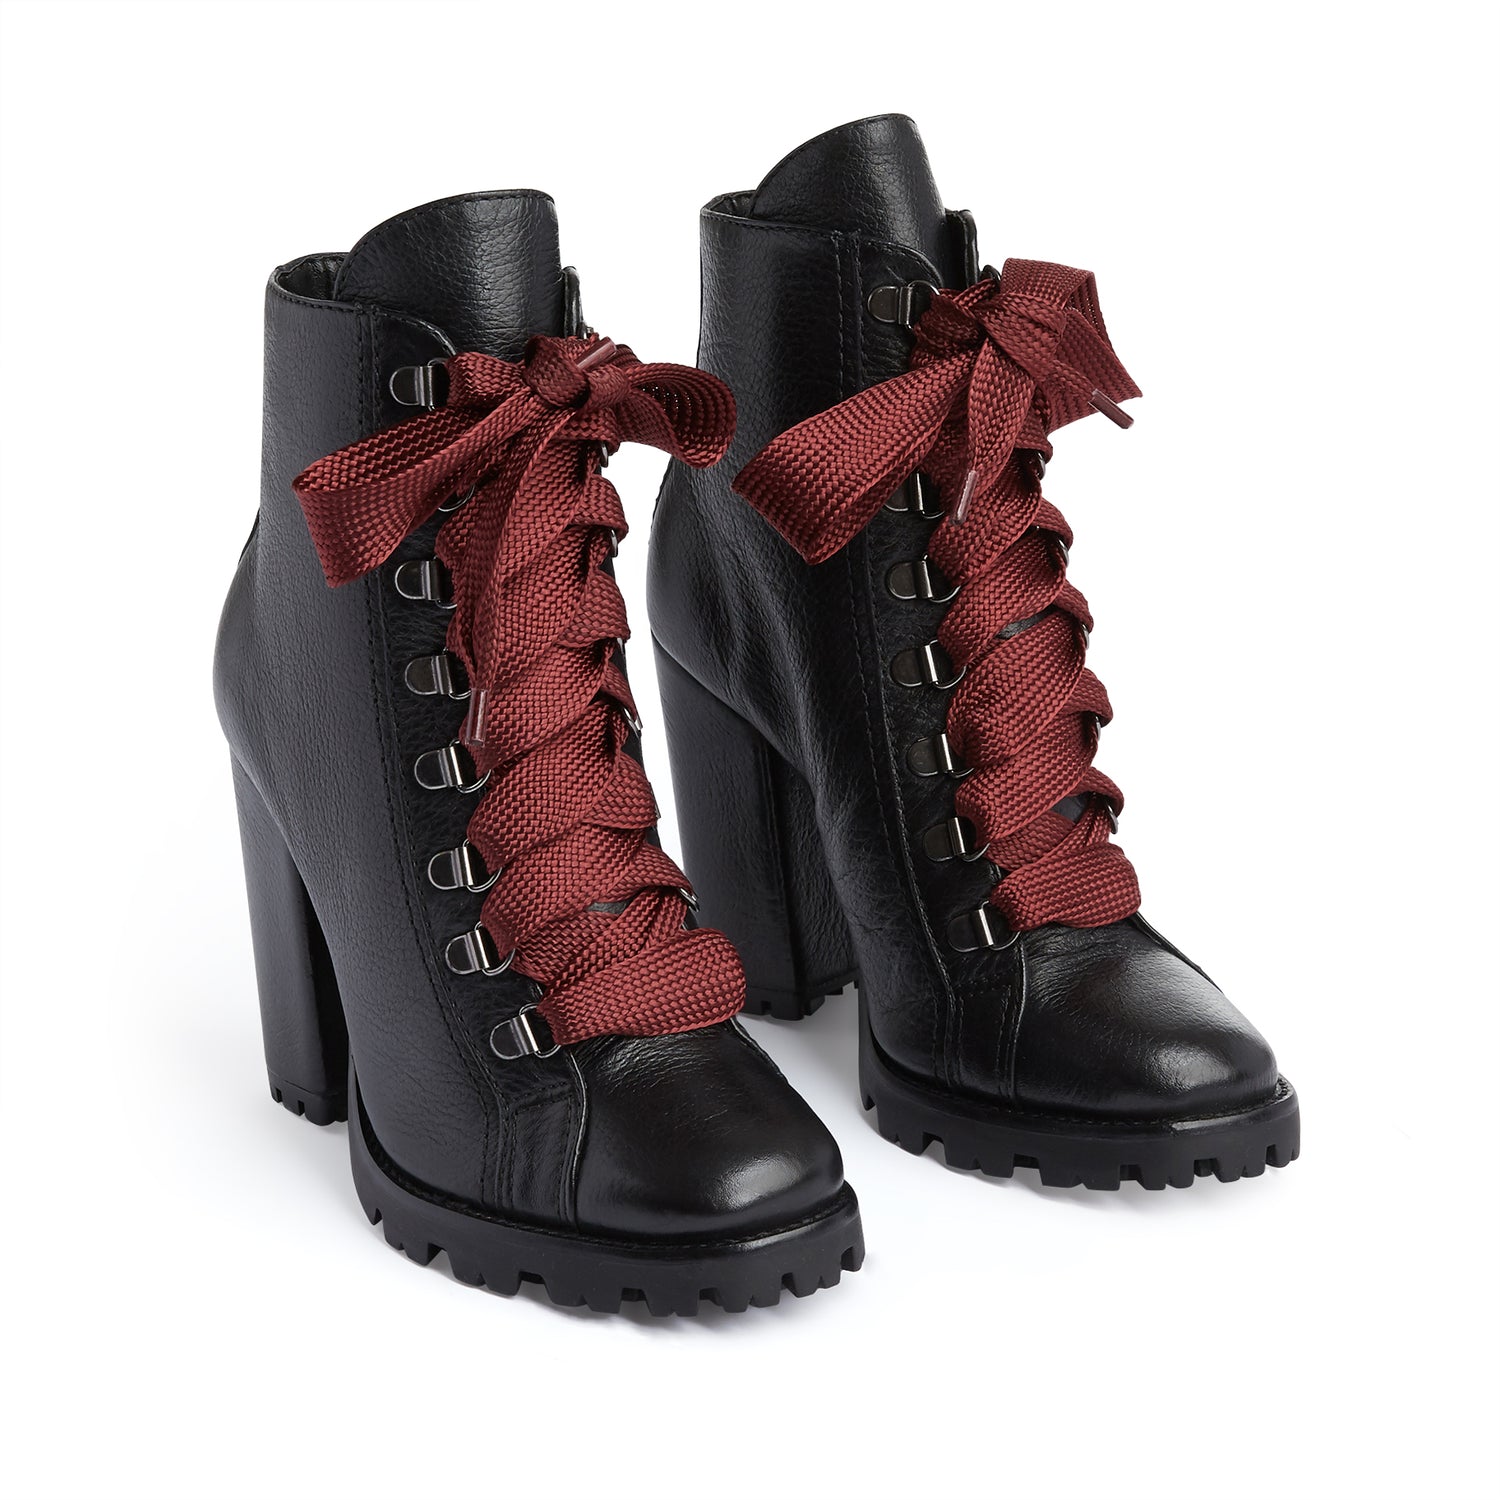 Black Combat Boots Woman Leather Rocker Boots with Fur shoes Military lace  up | eBay